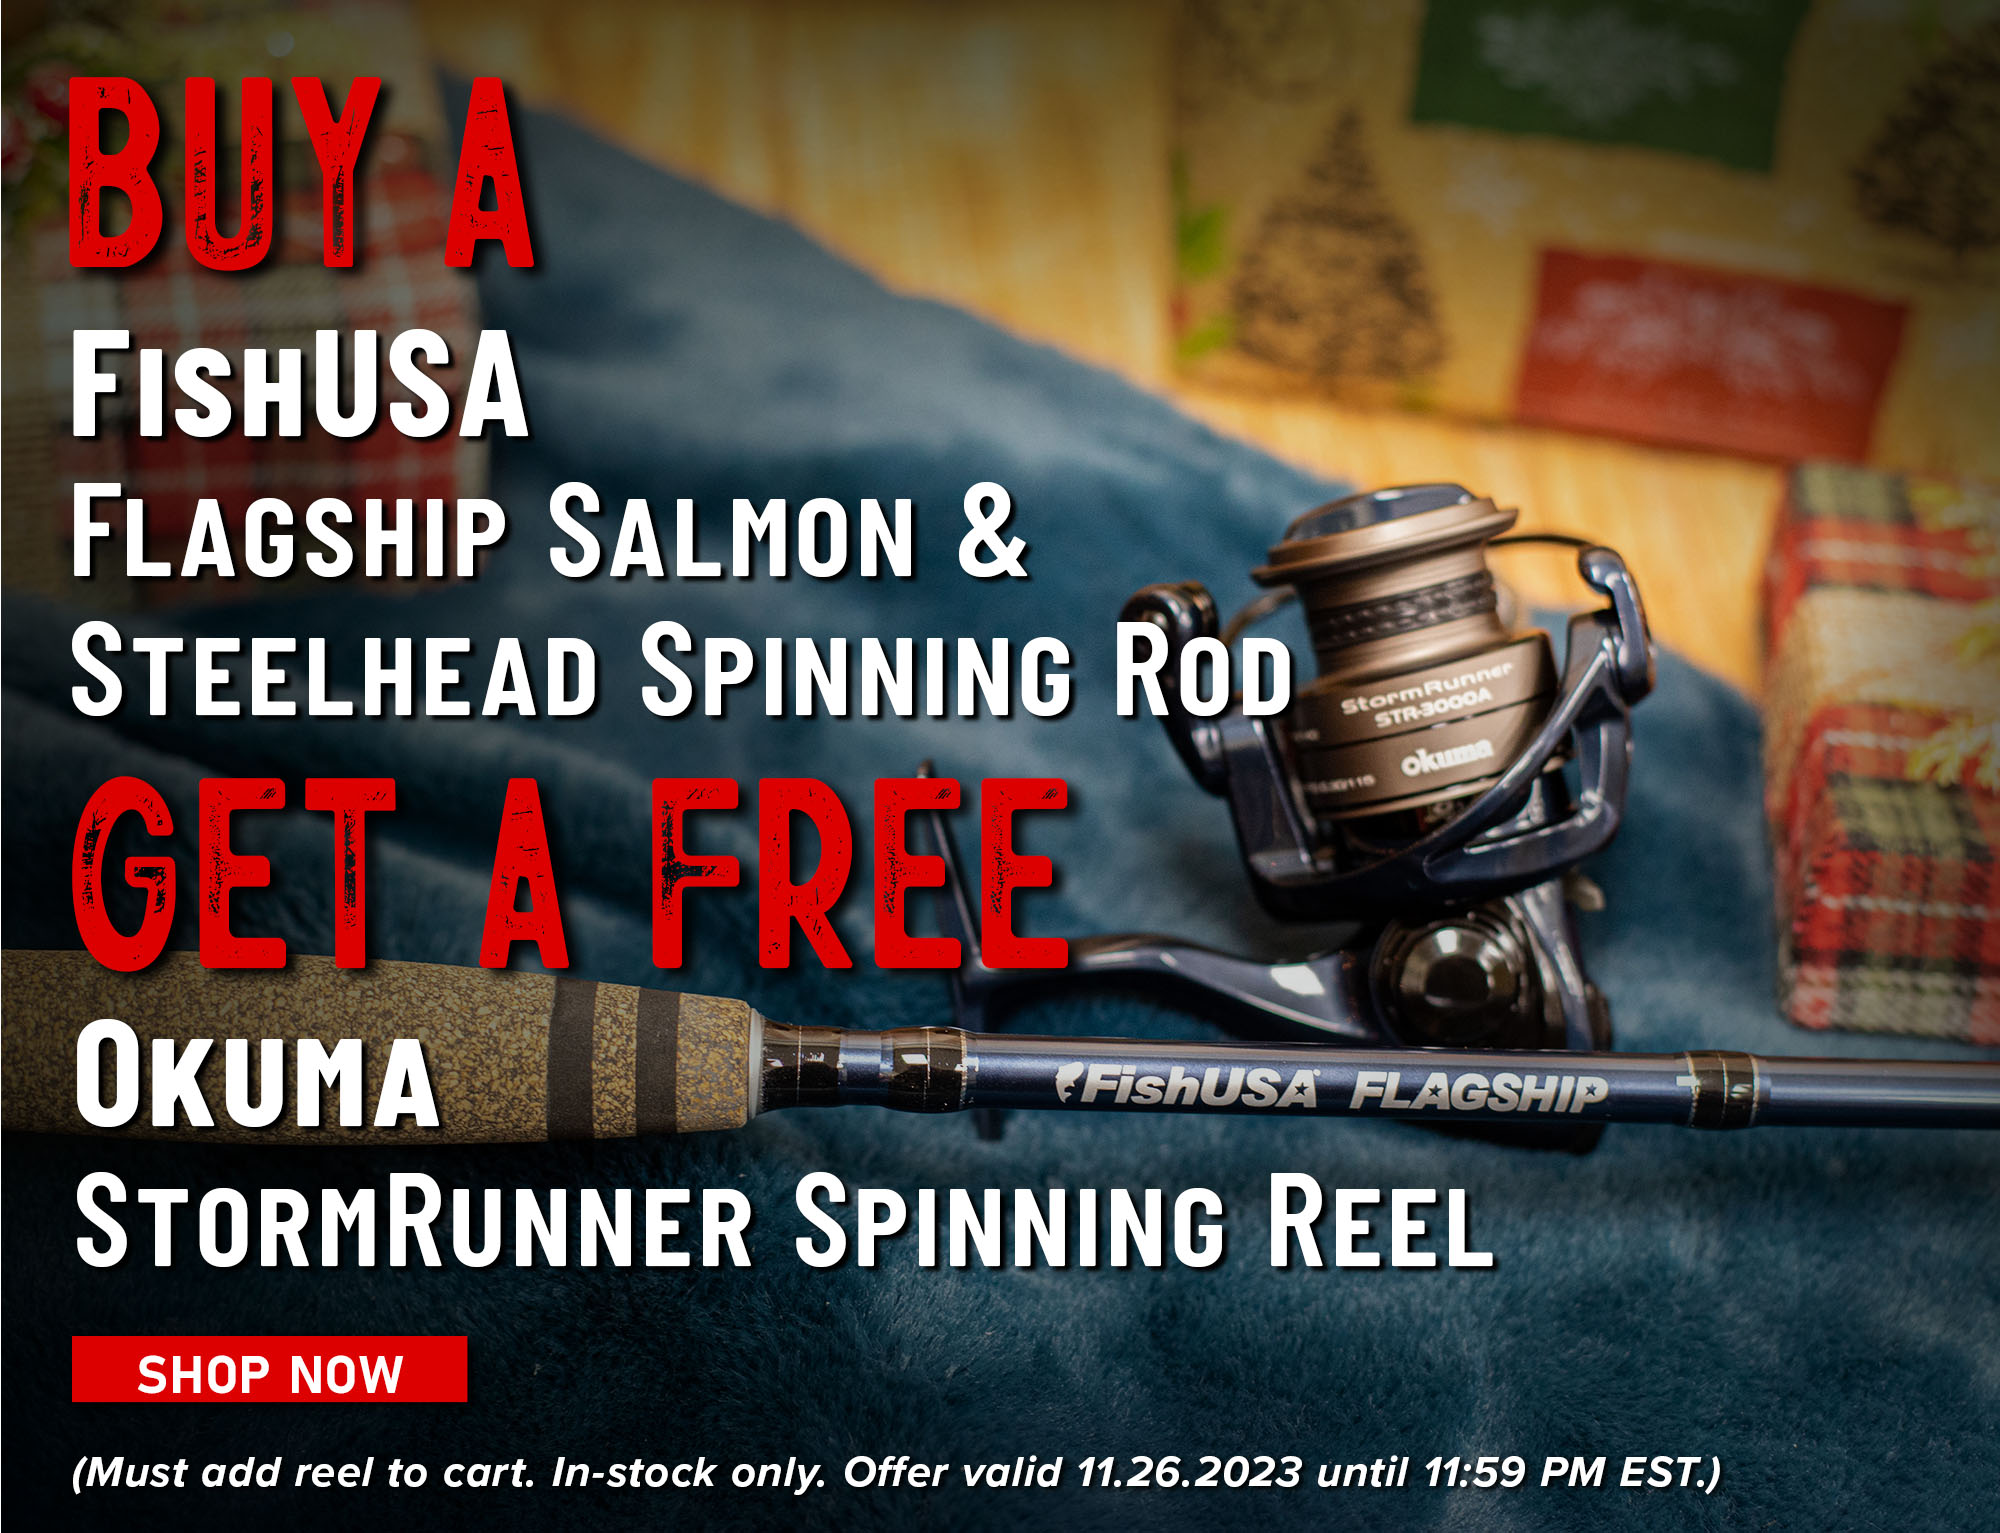 Buy A FishUSA Flagship Salmon & Steelhead Spinning Rod Get a Free Okuma StormRunner Spinning Reel Shop Now (Must add reel to cart. In-stock only. Offer valid 11.26.2023 until 11:59 PM EST.)